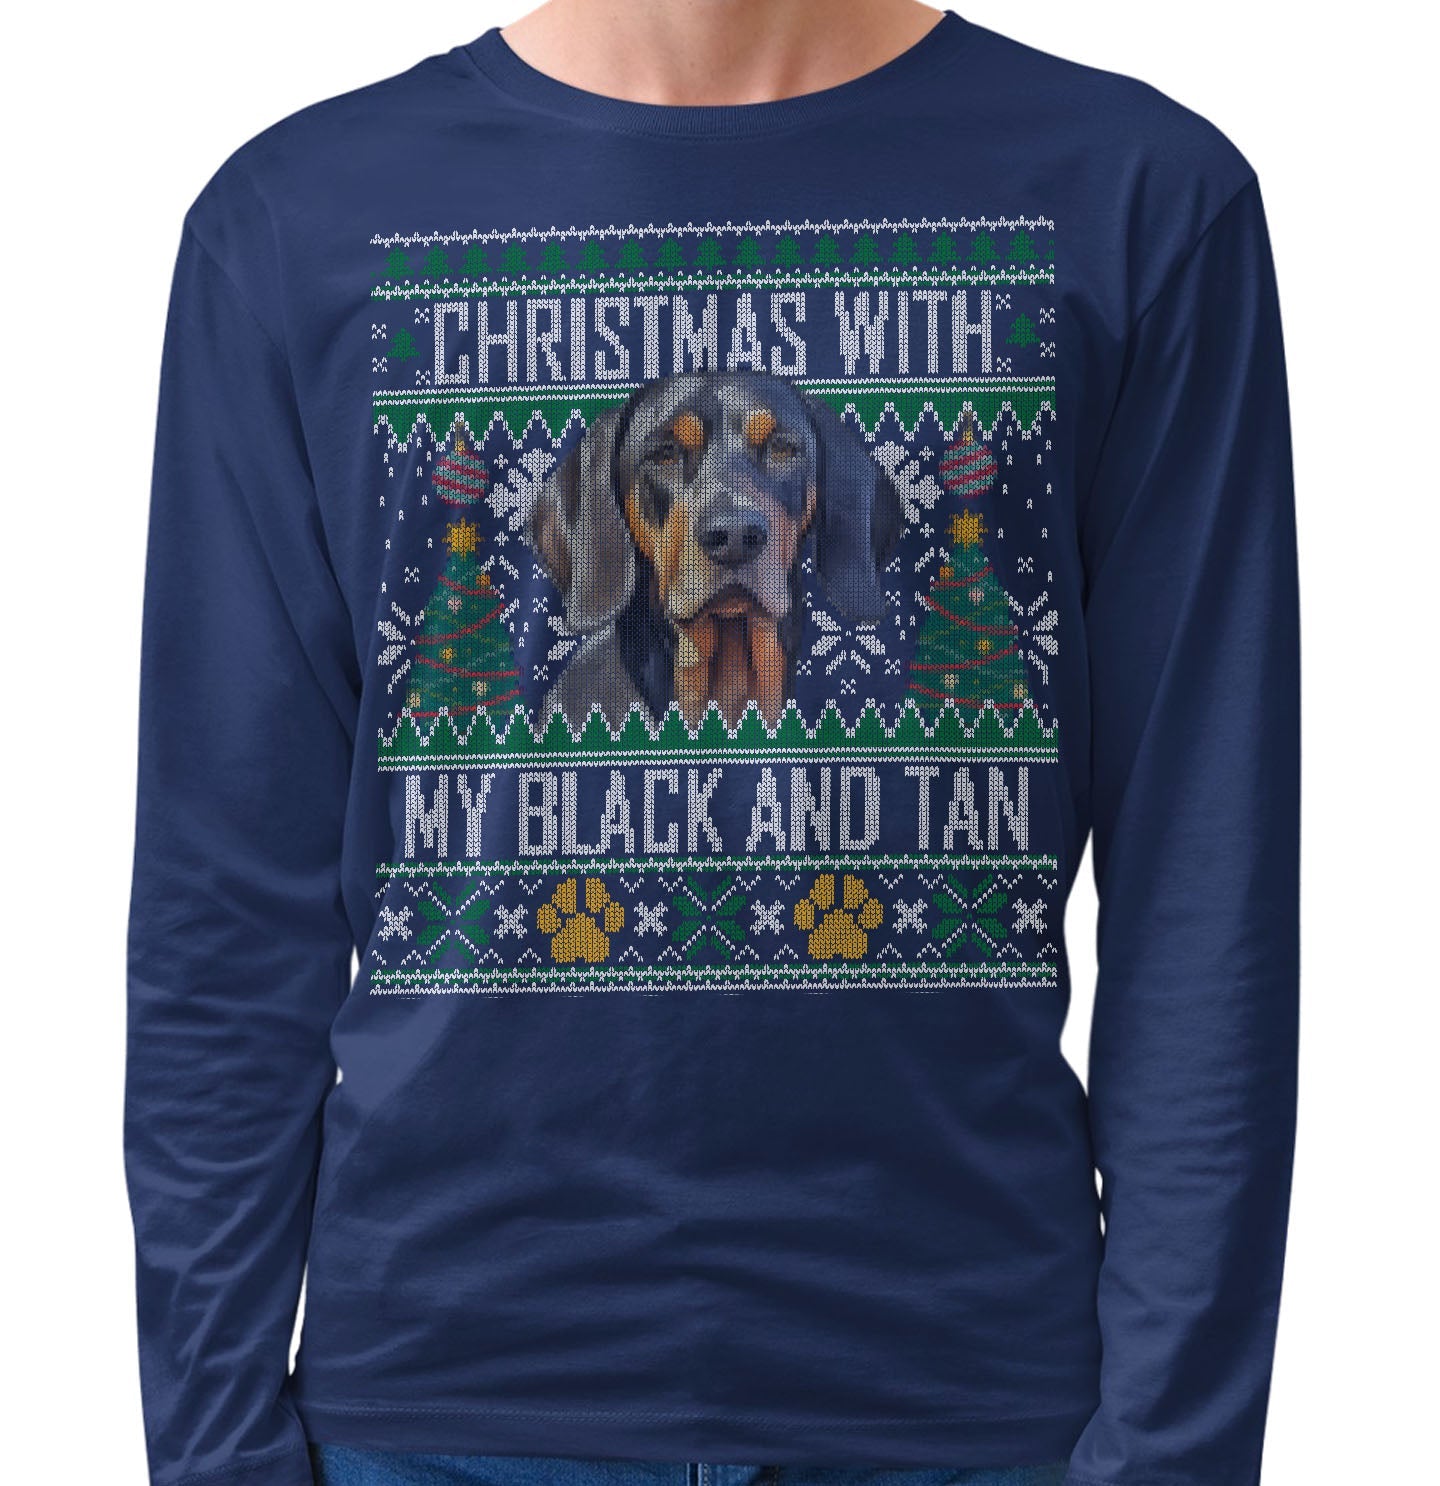 Ugly Sweater Christmas with My Black and Tan Coonhound - Adult Unisex Long Sleeve T-Shirt